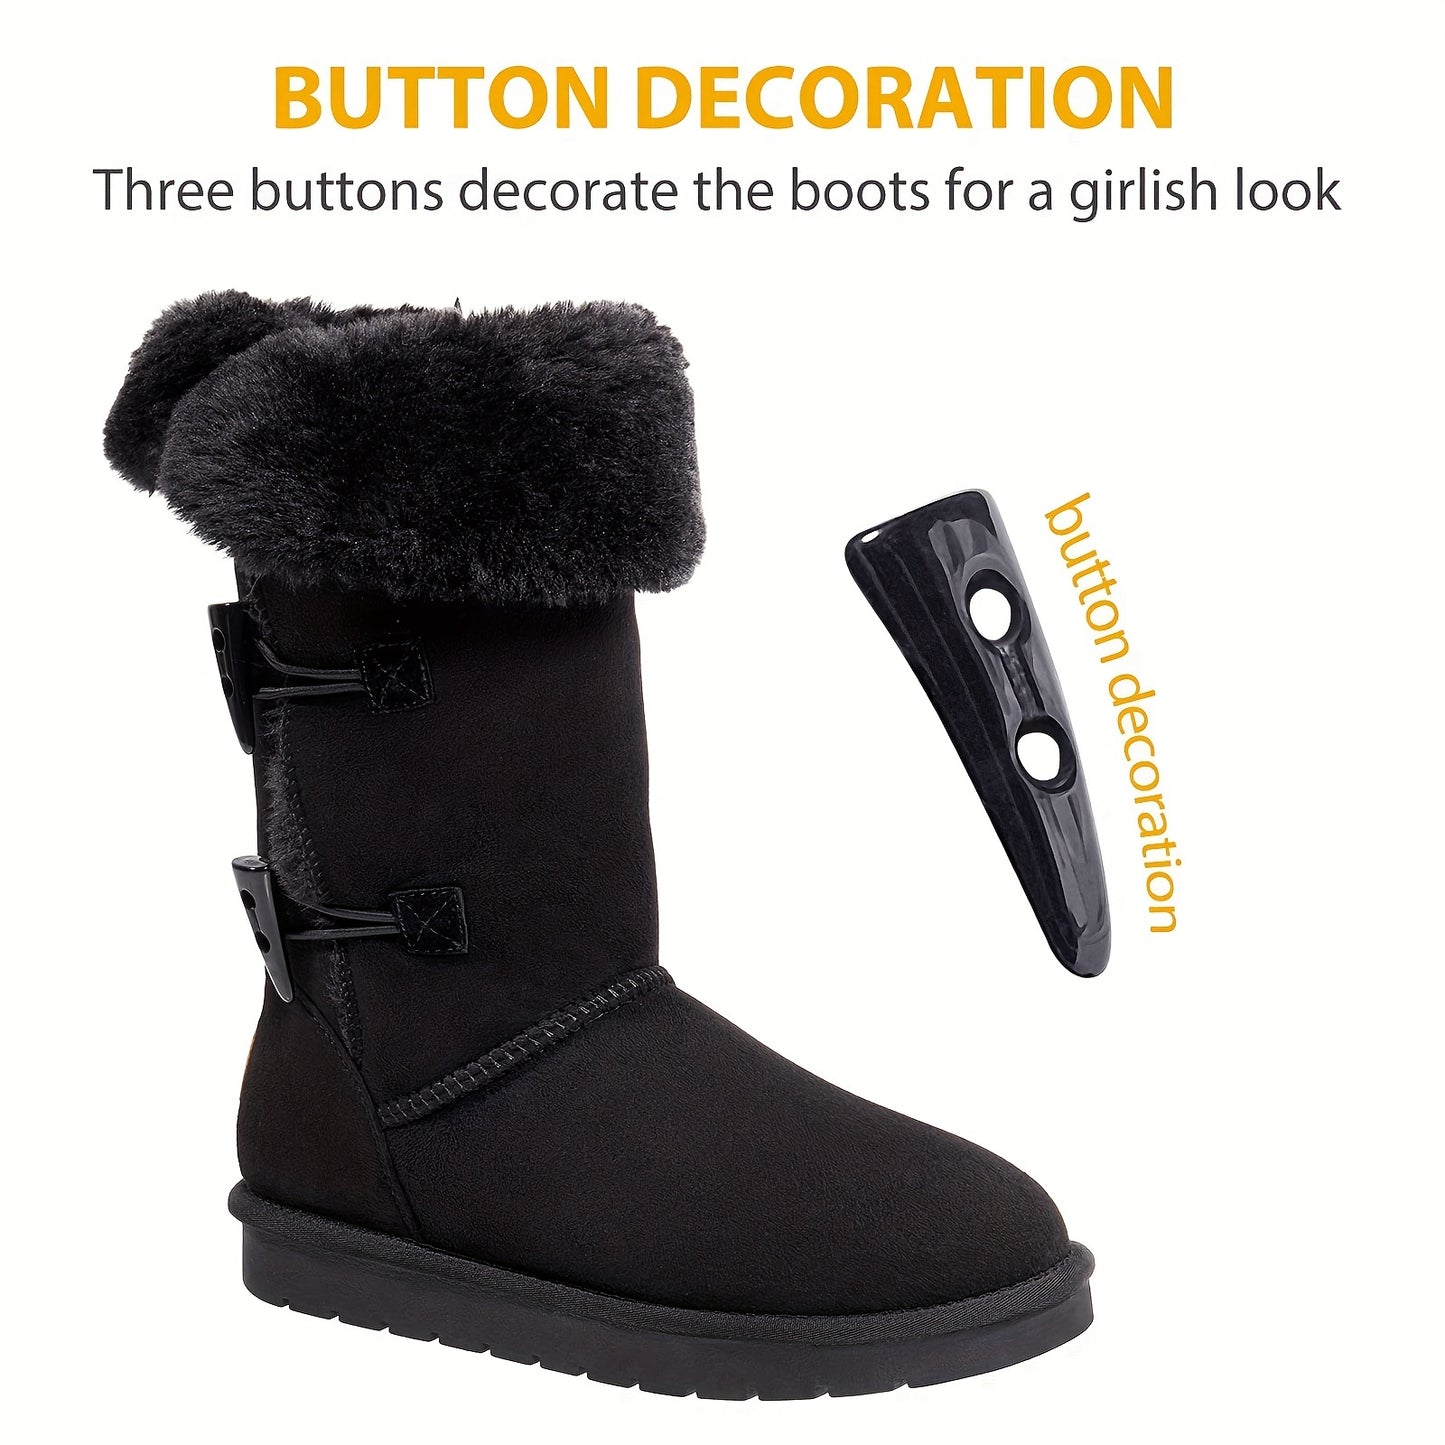 Elegant Faux Fur-Lined Winter Snow Boots for Women: Stylish, Comfortable, Knee-High with Non-Slip Sole - Boots-CasualFlowshop 